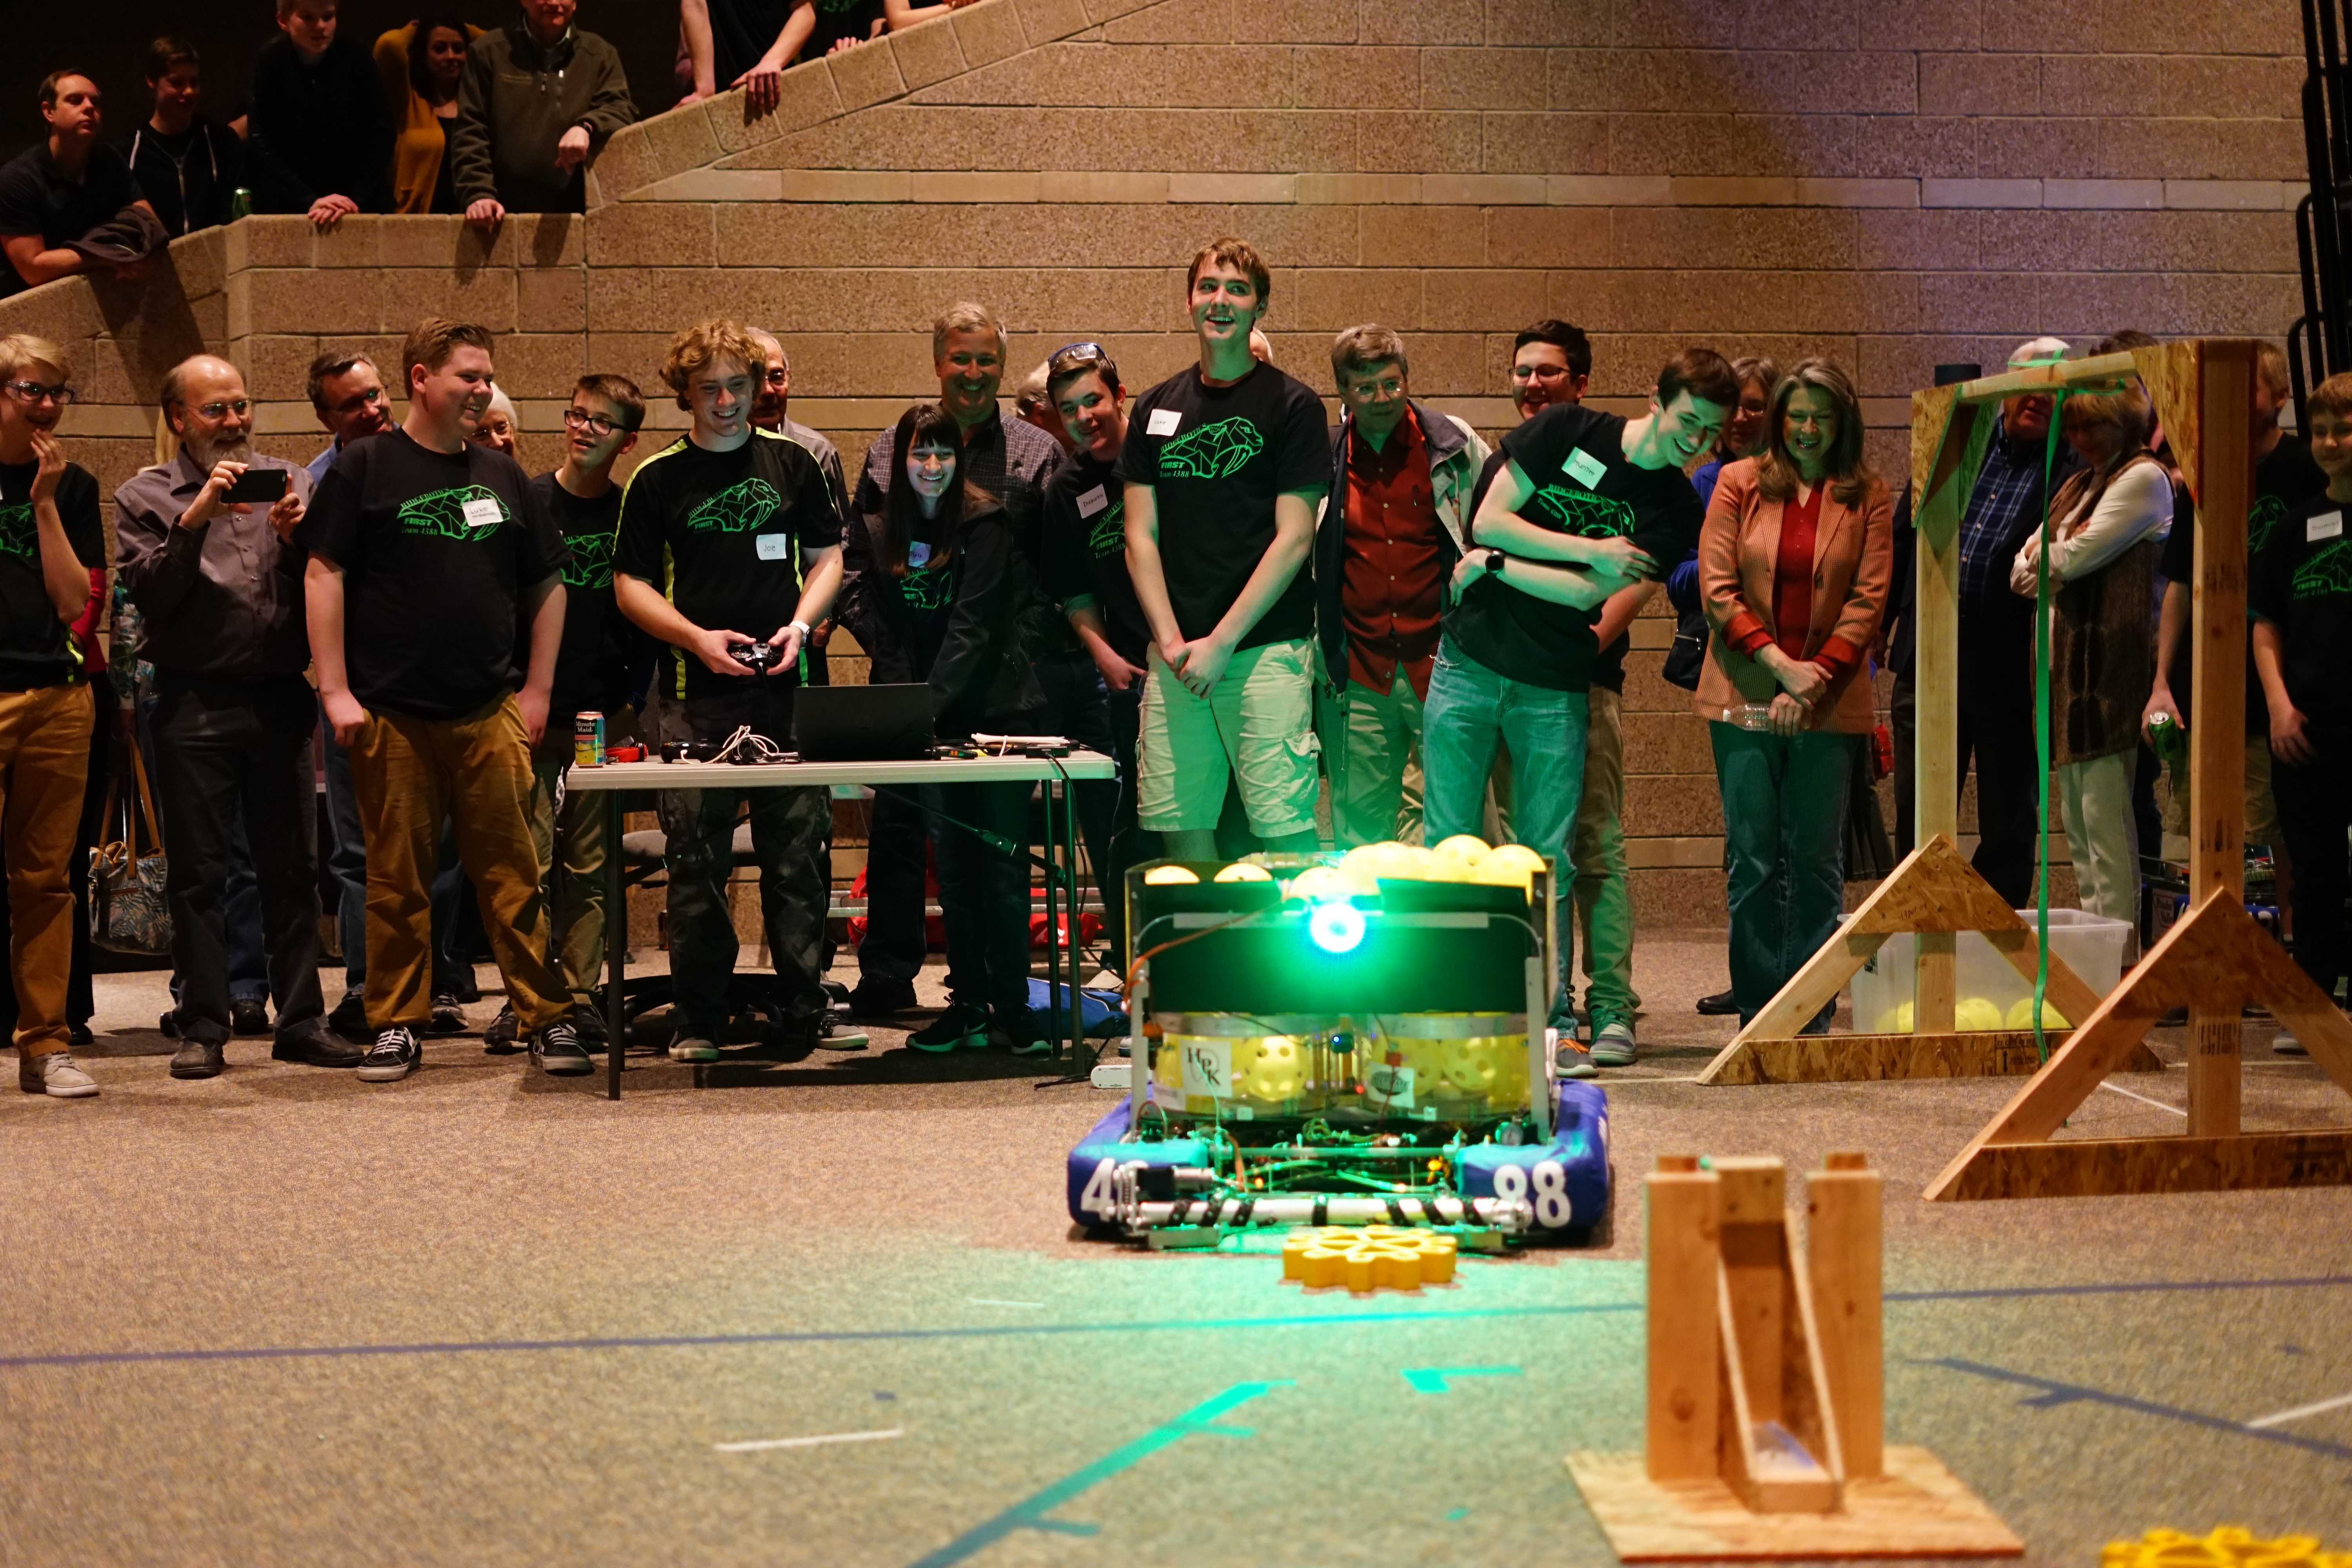 Ridgebotics team bags up robot for San Diego competition